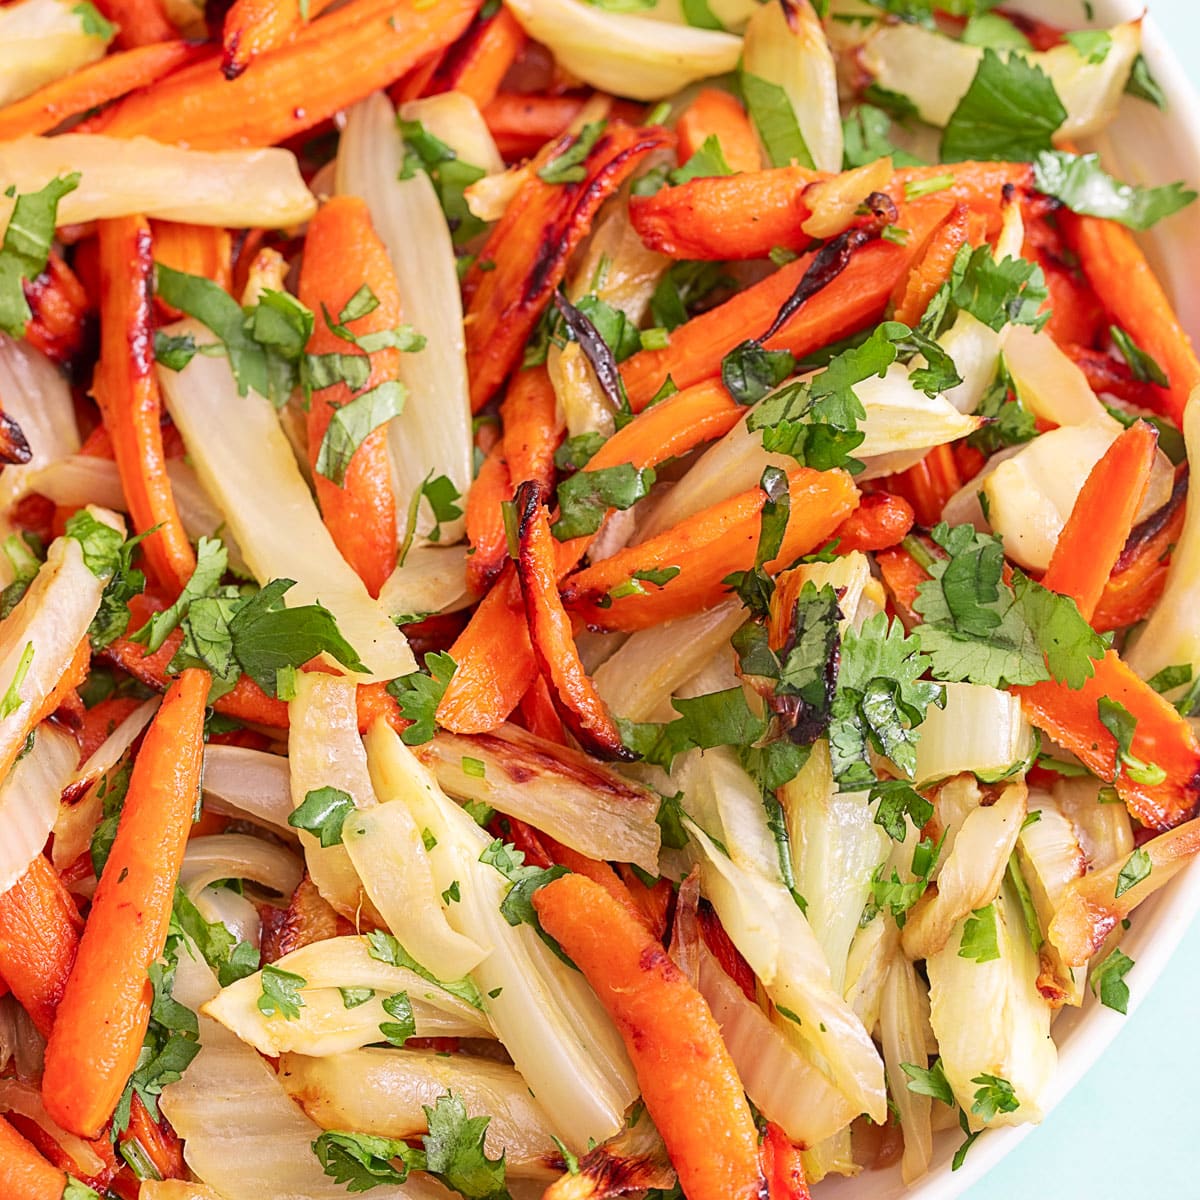 Top view of a bowl filled with carrots and fennel with cilantro garnish